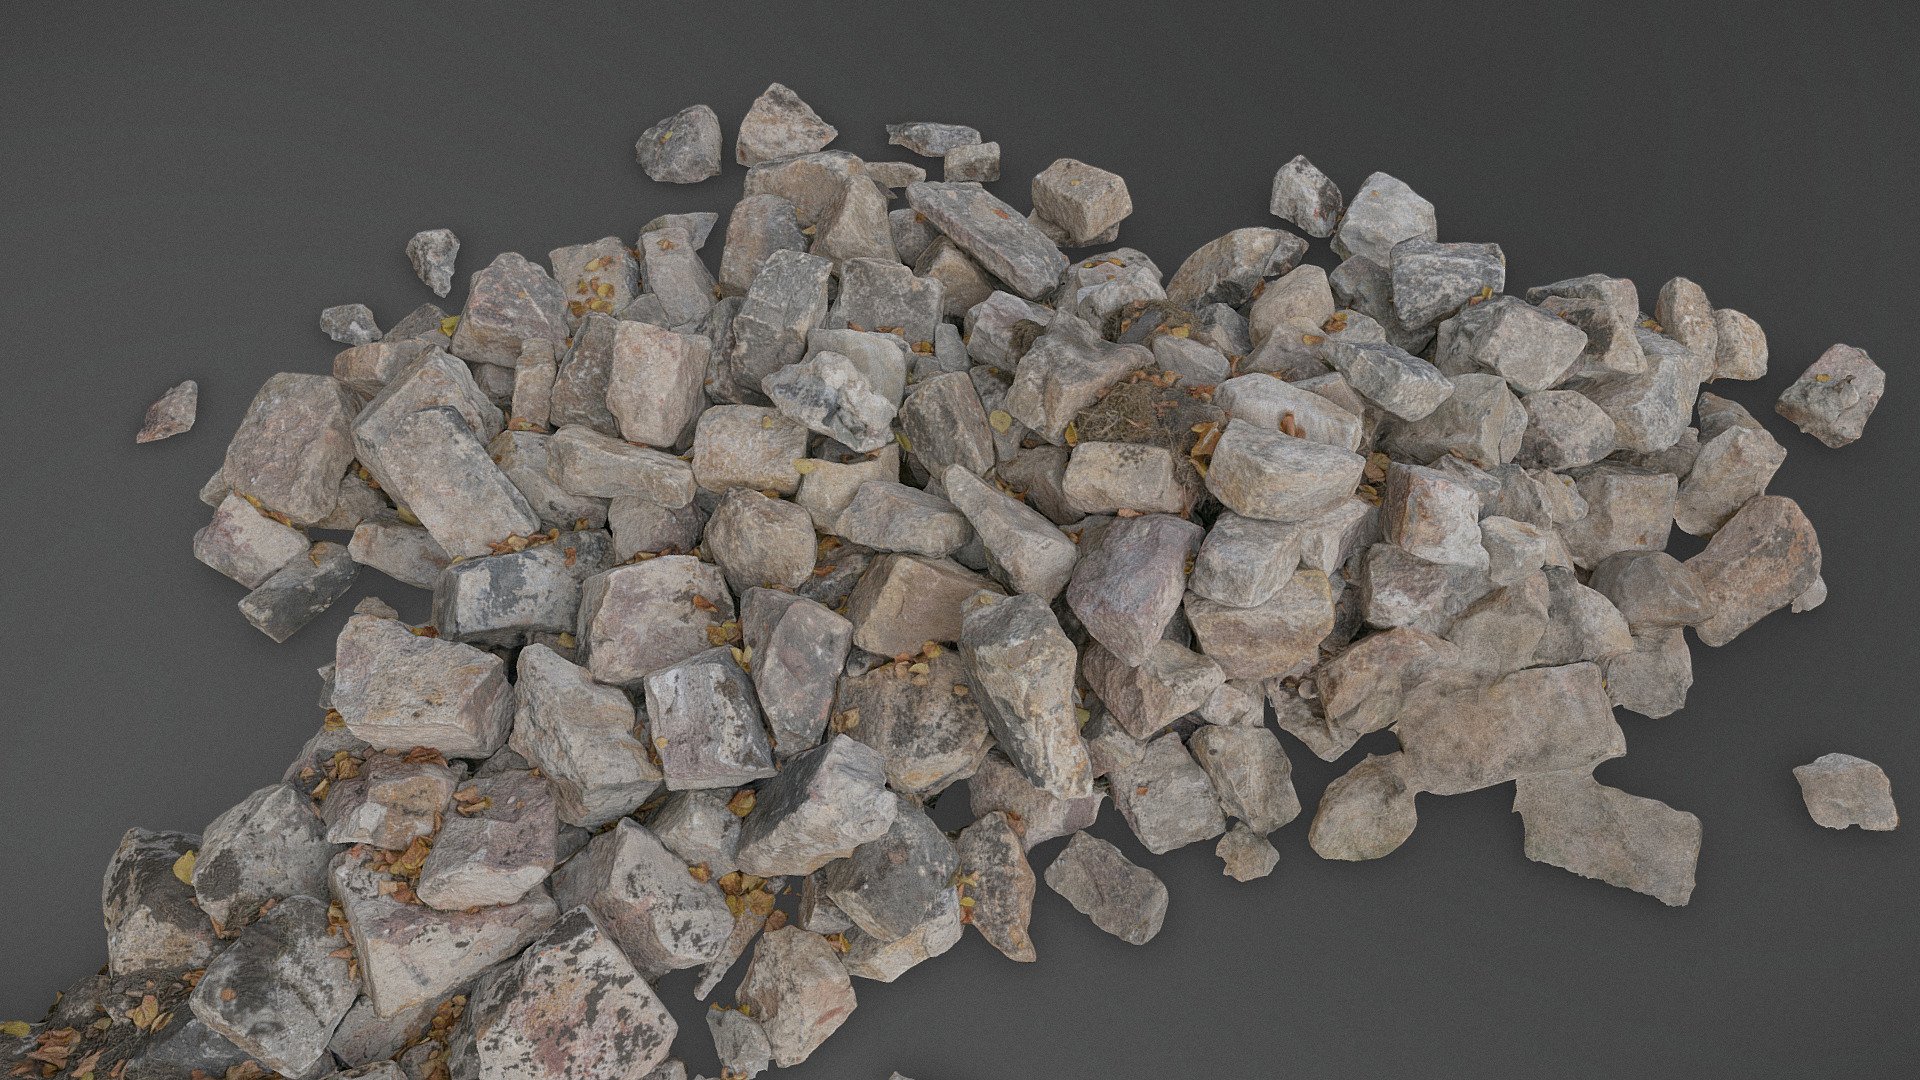 Debris concrete demolition ruin house building wall junk pieces construction yellow chunks and stones with some dirt and yellow linden tree leaves on top

Photogrammetry scan 240x36MP, 4x8K texture + HD Normals, isolated from ground - Debris junk stones - Buy Royalty Free 3D model by matousekfoto 3d model